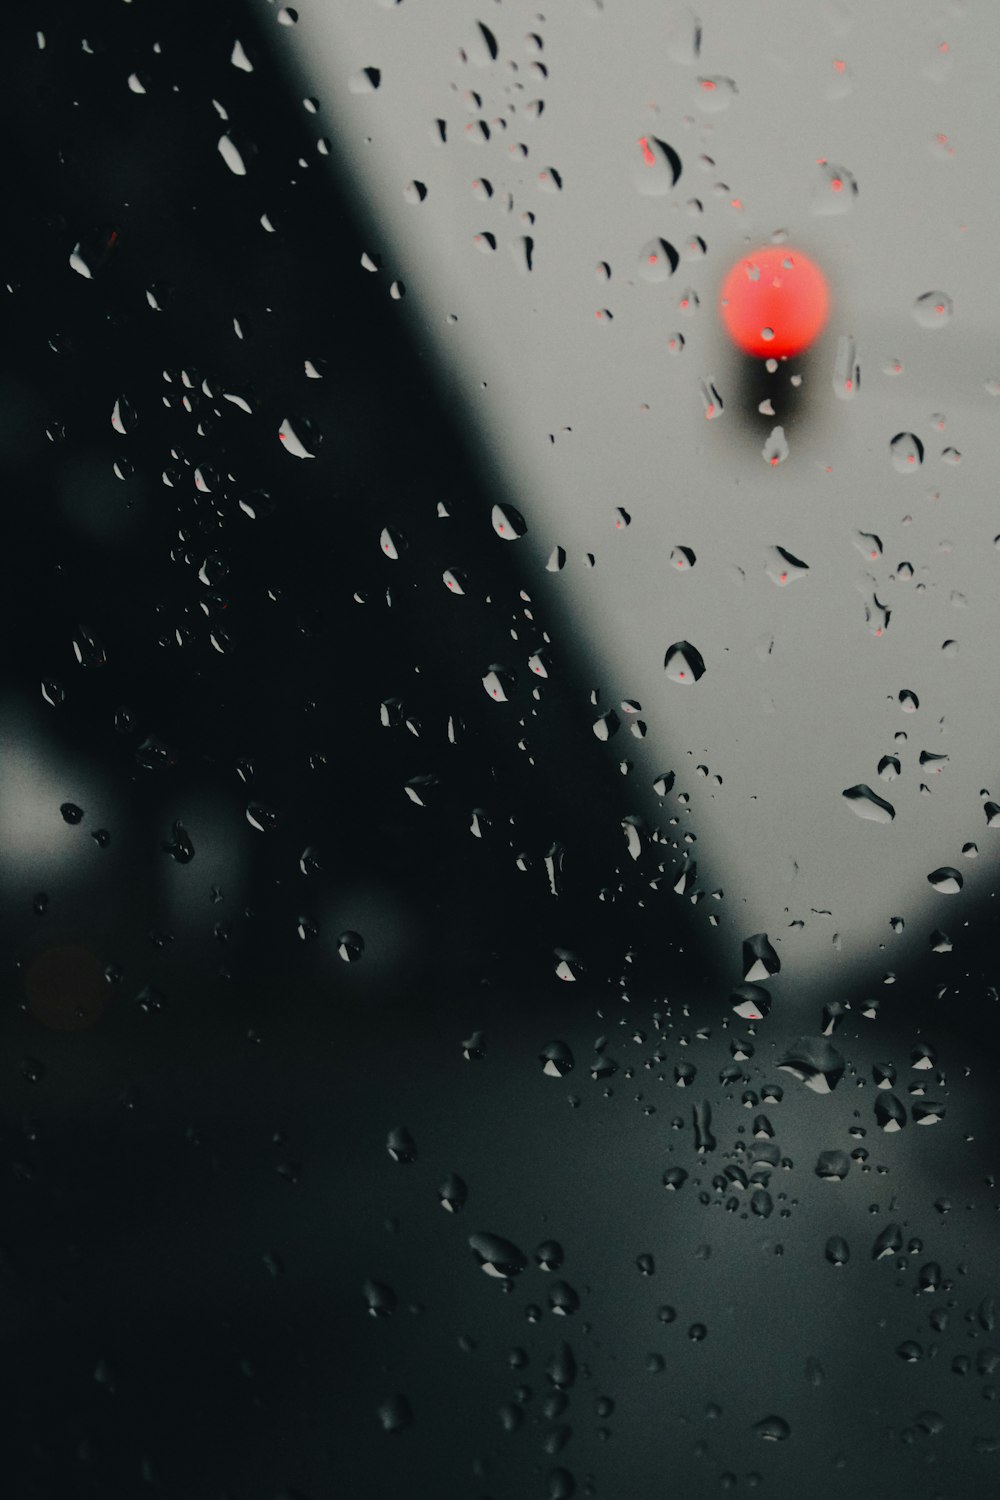 rain drops on a window with a red light in the background